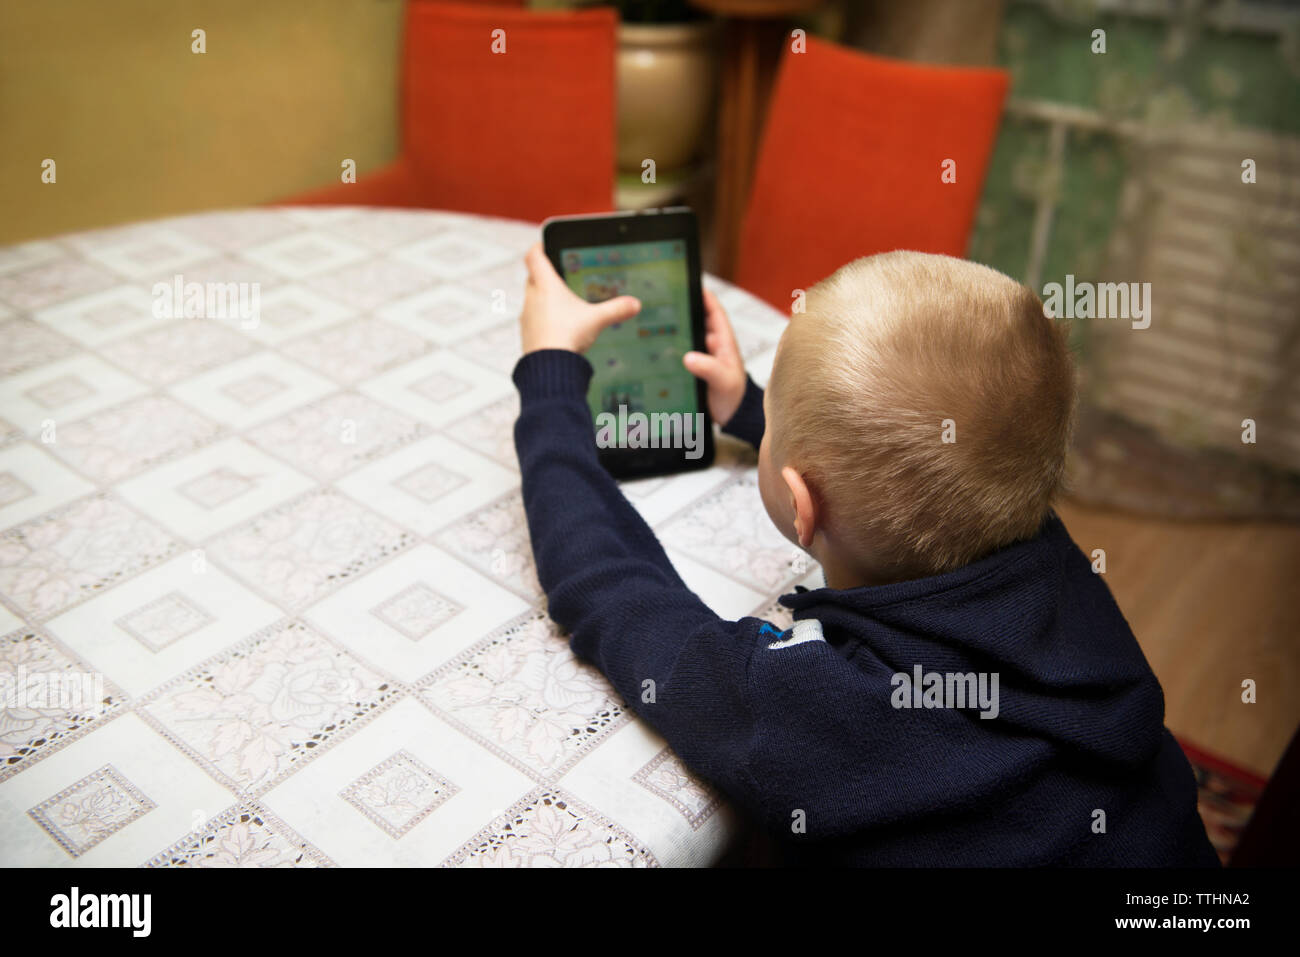 Boy using tablet computer while sitting at table Banque D'Images